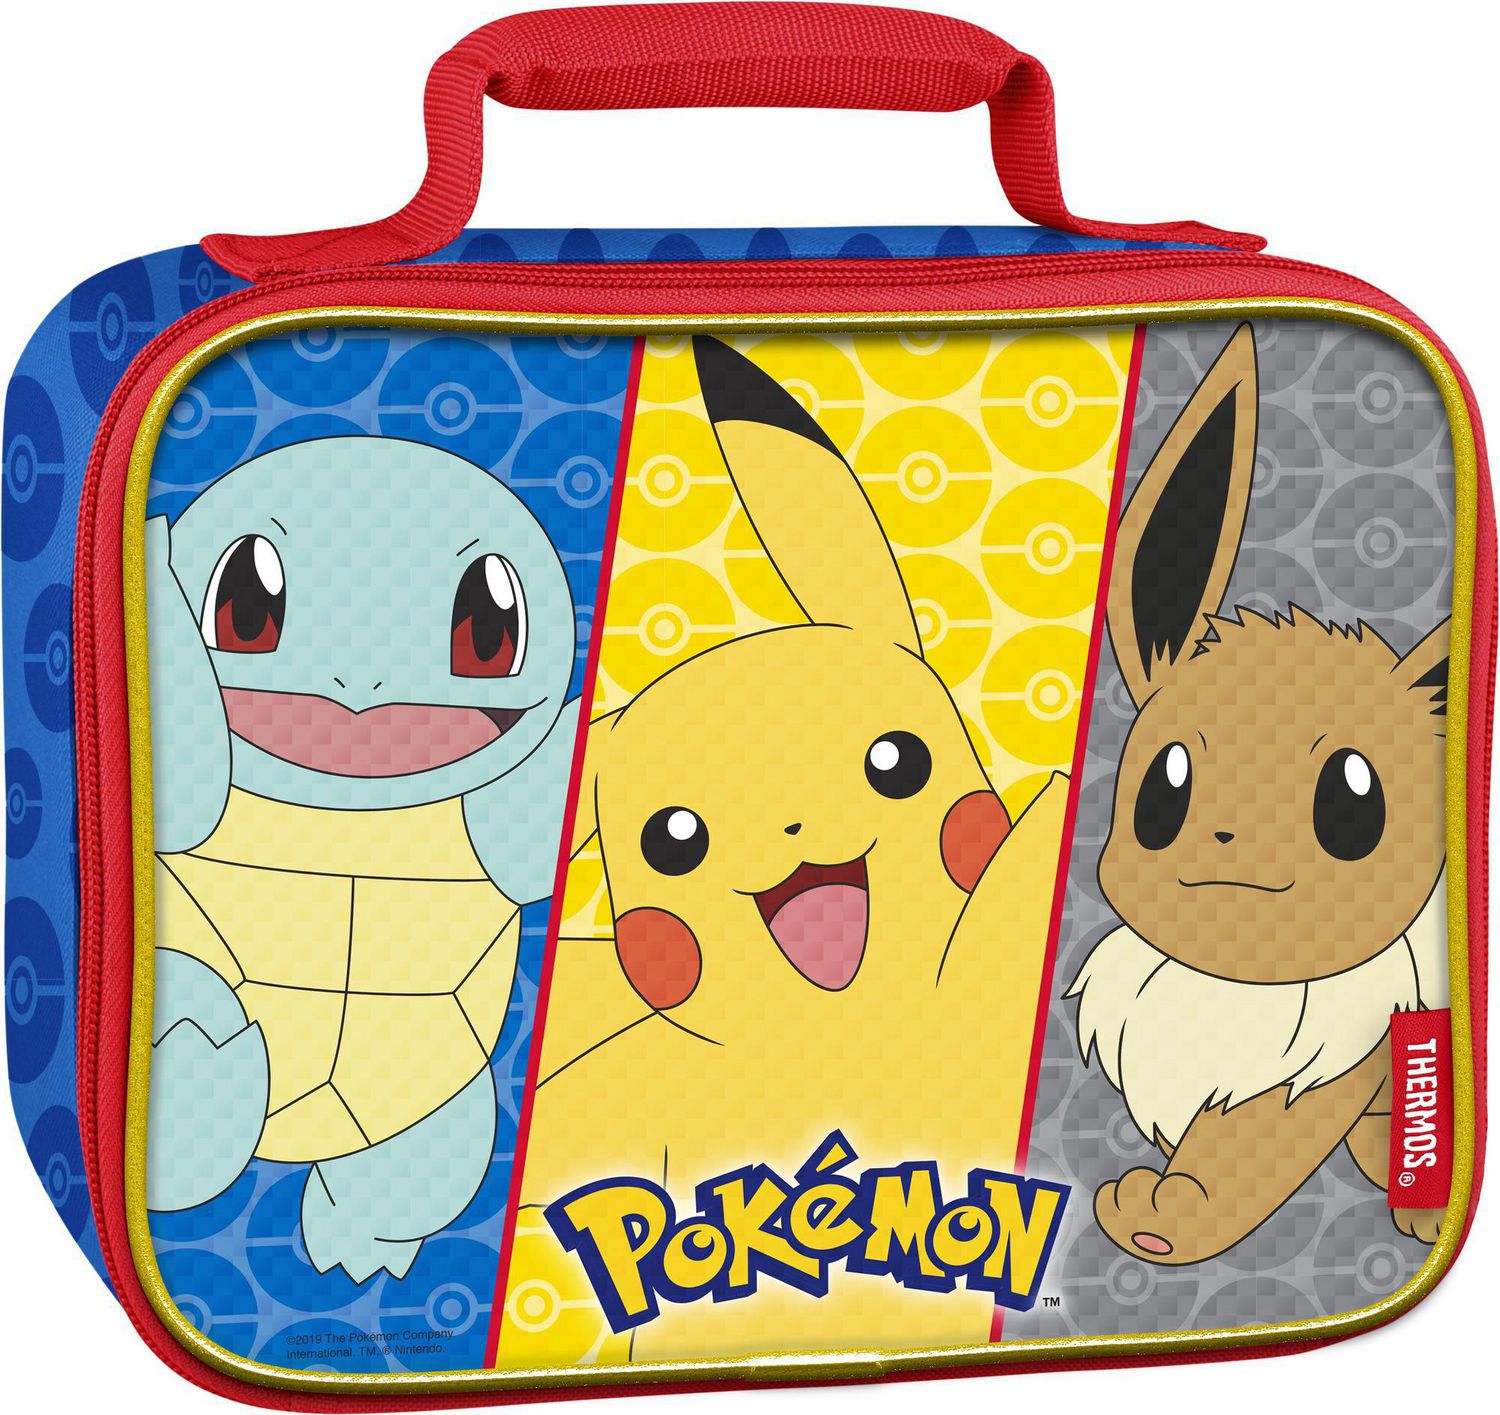 Thermos Brand Lunch Bag Pokemon with LDPE | Walmart Canada